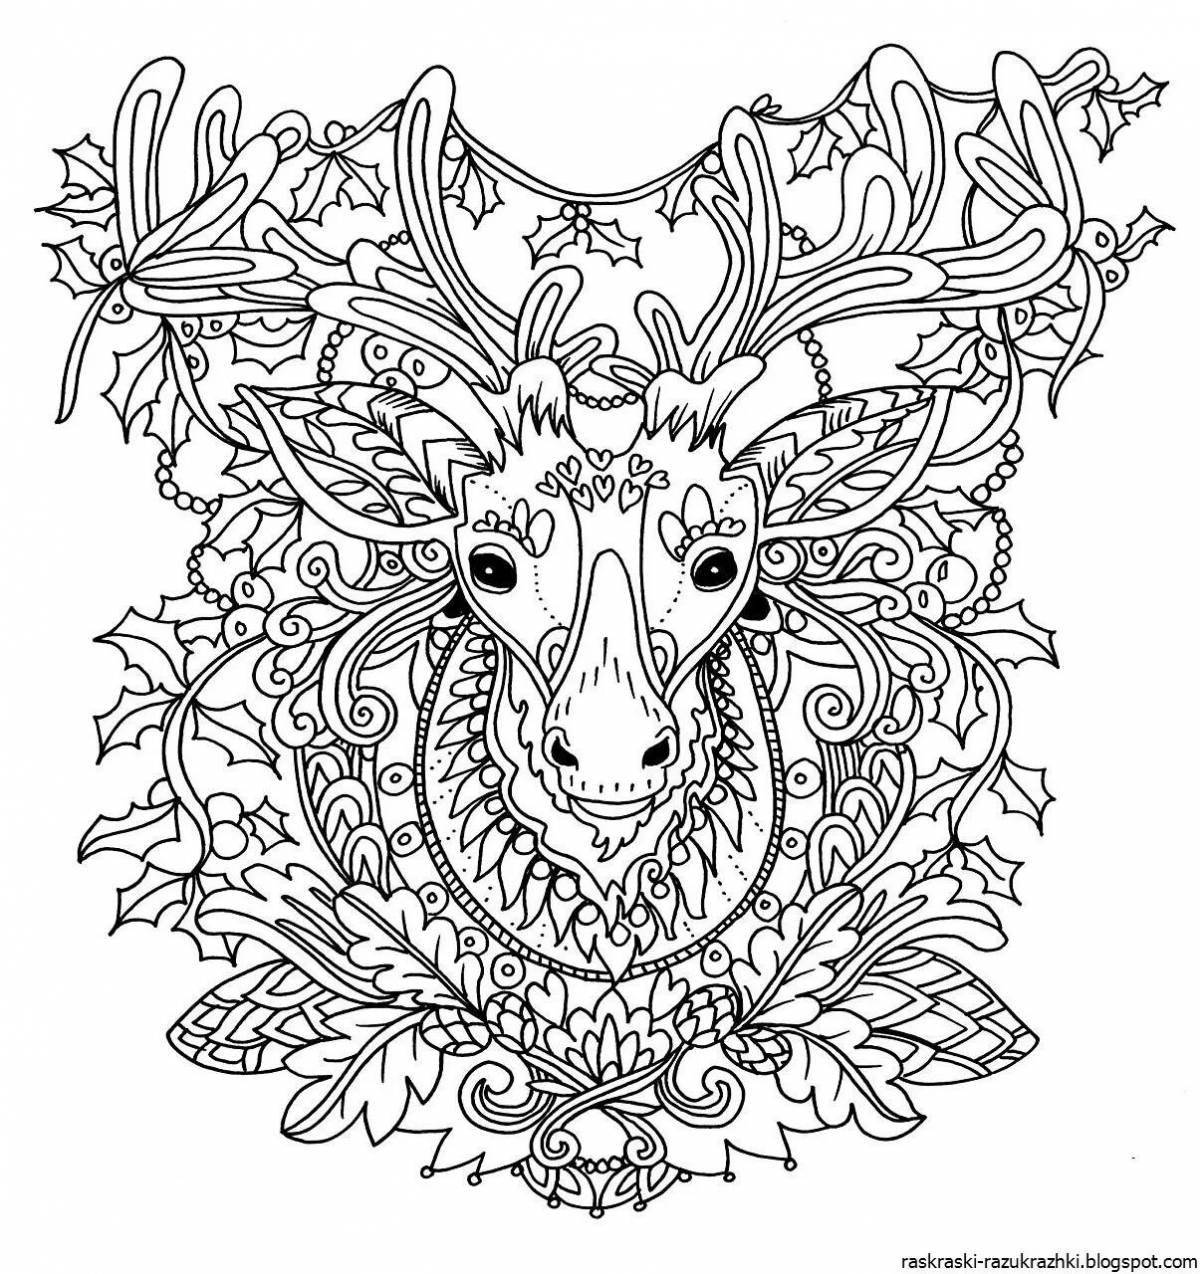 Delightful animal coloring book for girls